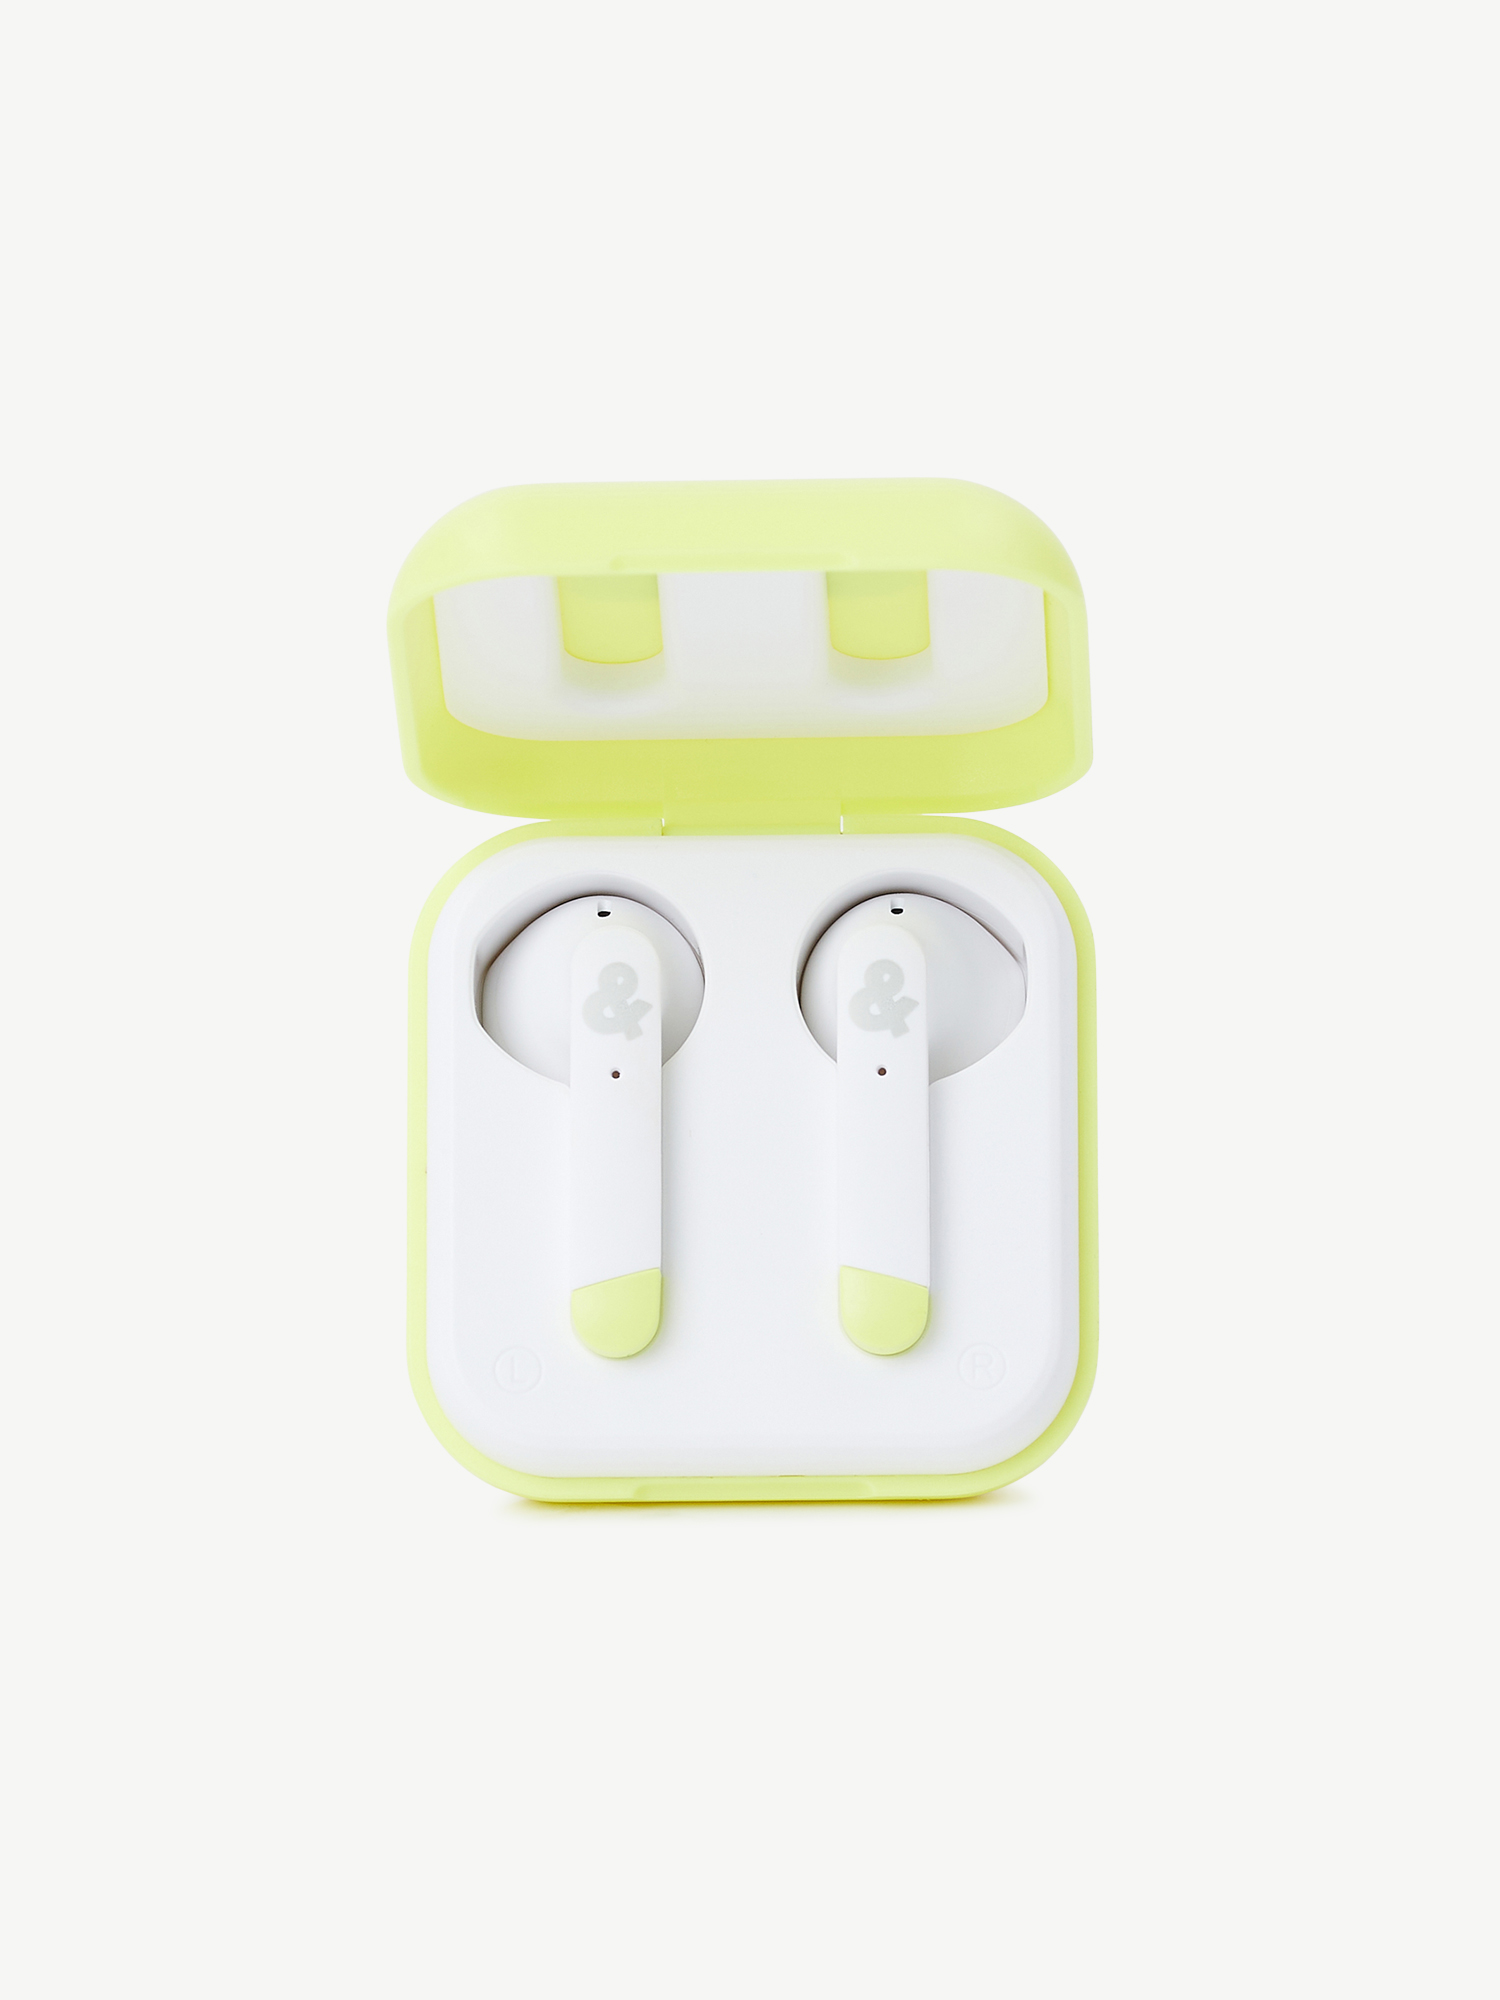 Love & Sports Bluetooth Wireless Earbuds and Charging Case, Neon Lime - image 5 of 5